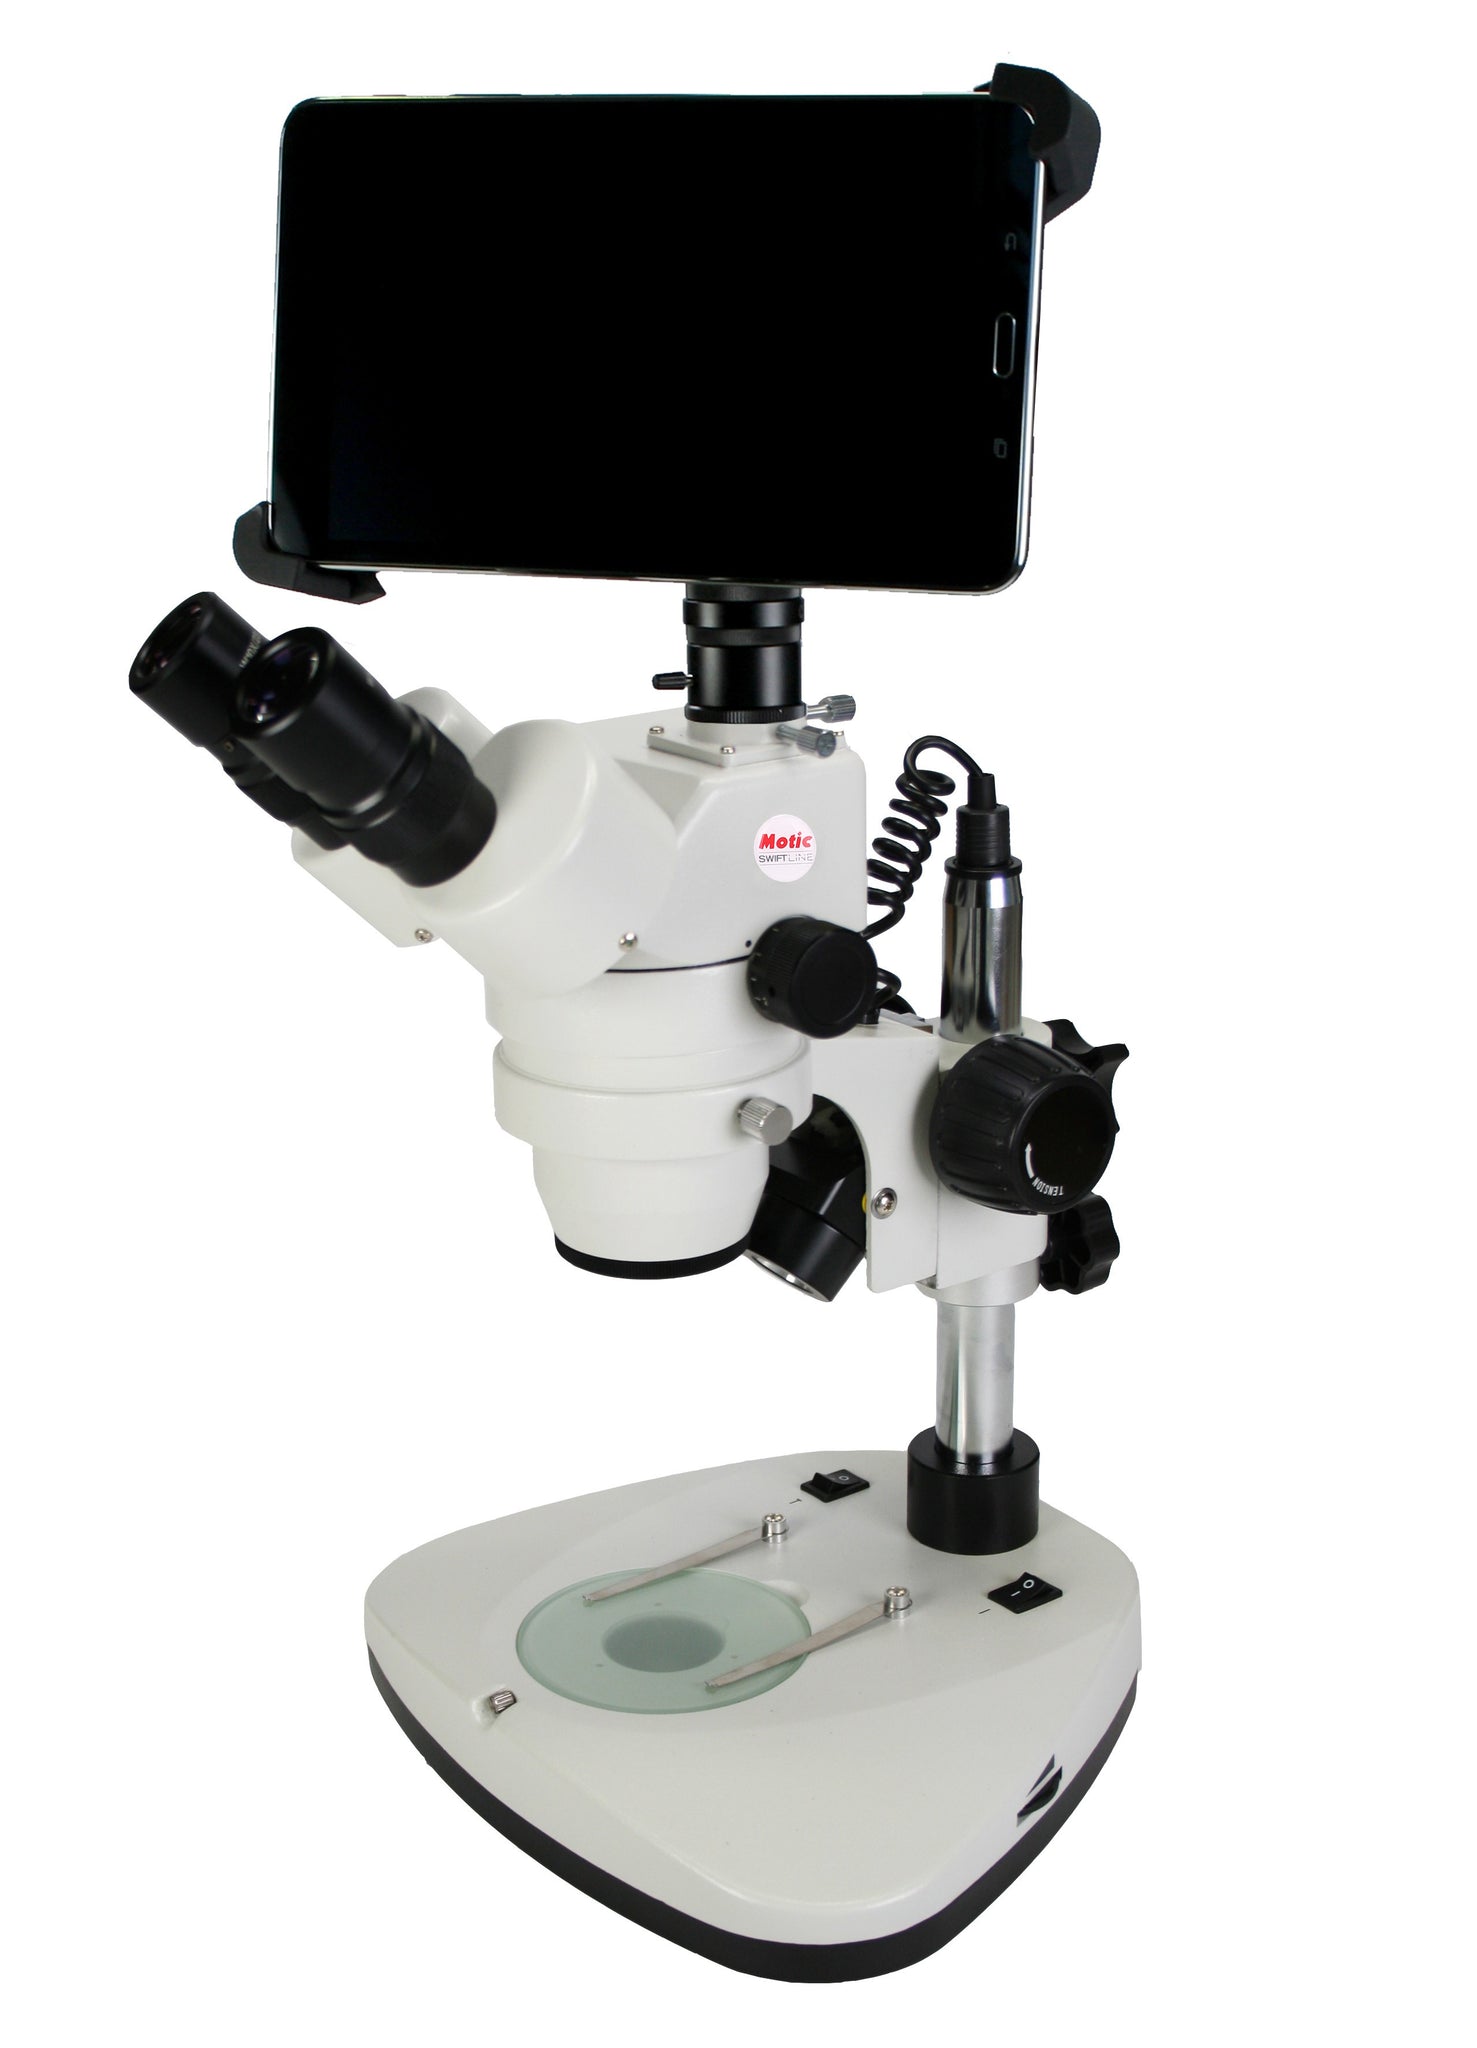 Swift M29 Zoom Stereo Microscope (1X-4X) with 8" Tablet